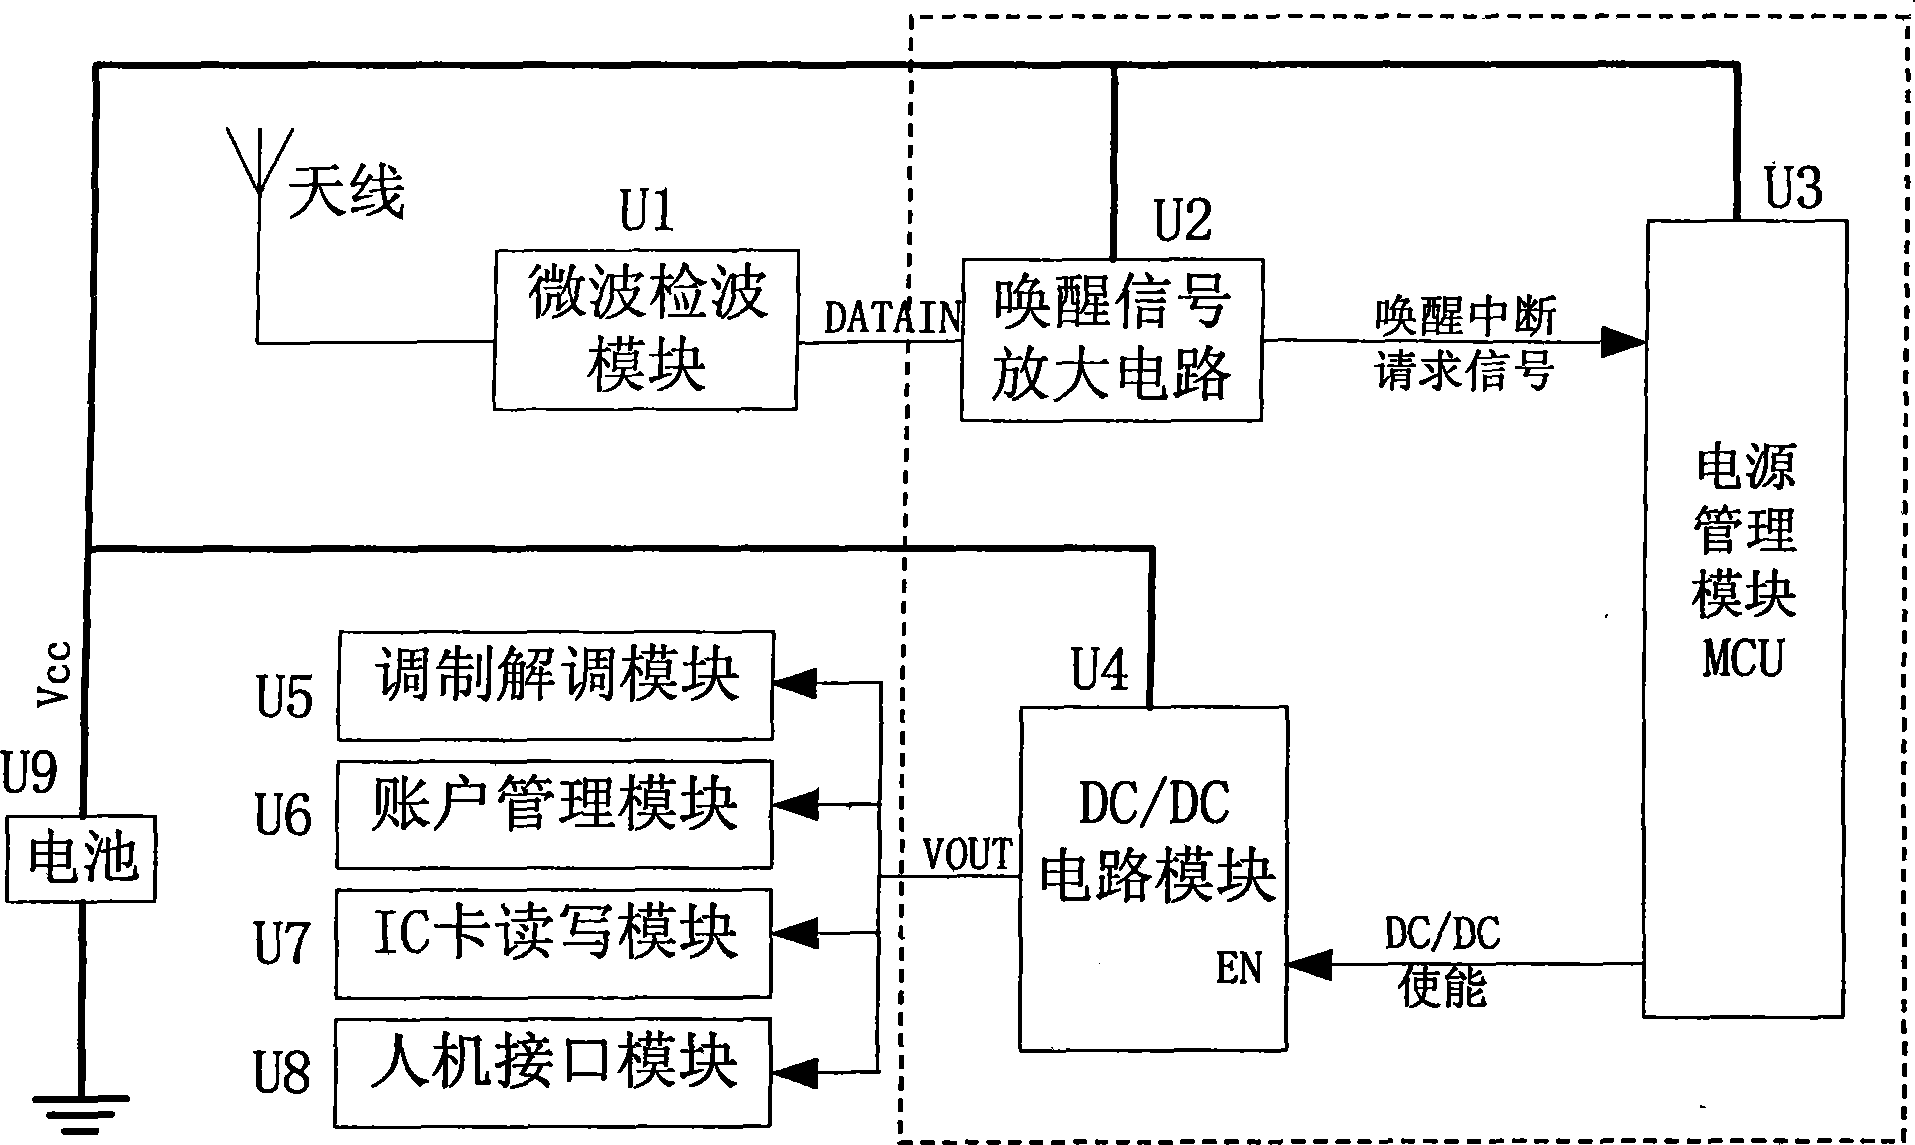 Intelligent electric power management implementation device for vehicle-mounted unit of non-stop toll collecting system